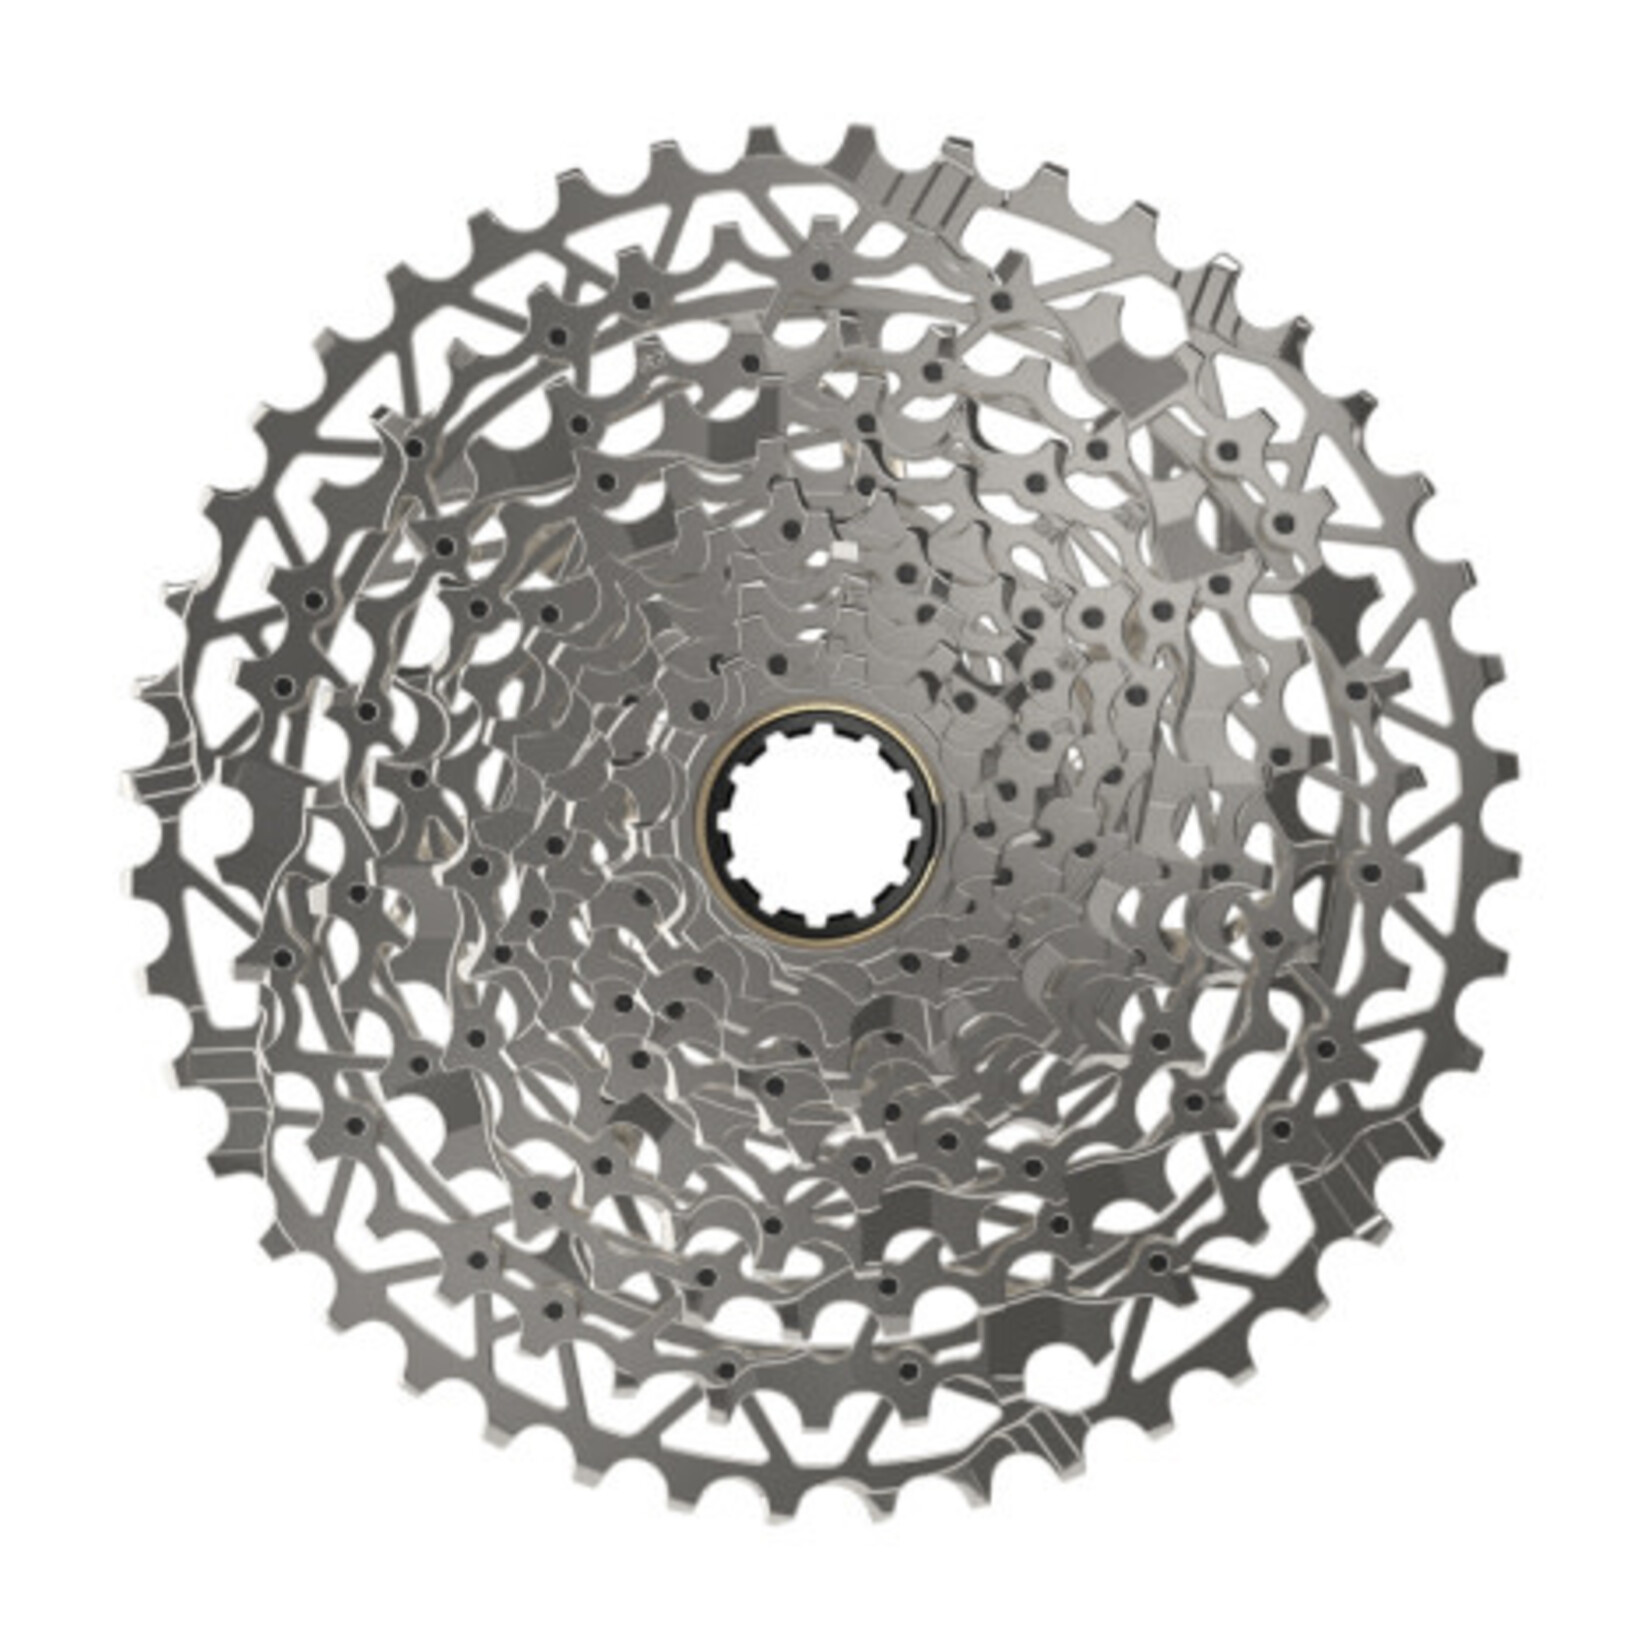 Sram SRAM RIVAL XG-1251 CASSETTE (FOR USE WITH XPLR RDS): 10-44T